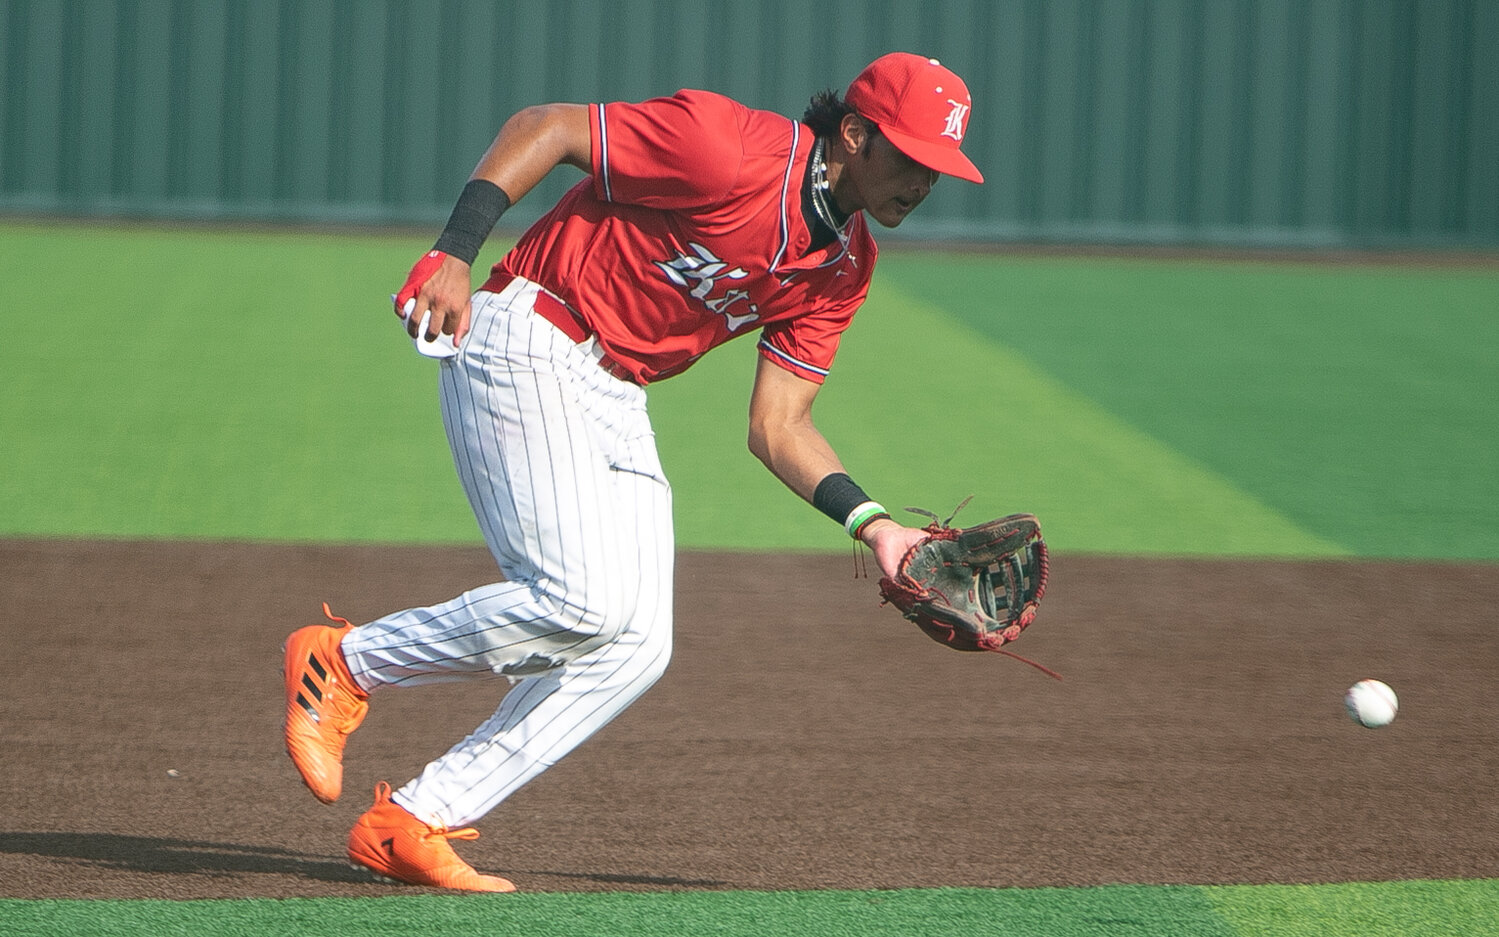 Nayden Ramirez makes a play in the infield during Saturday's Regional Quarterfinal between Katy and Tompkins at Cy-Springs.